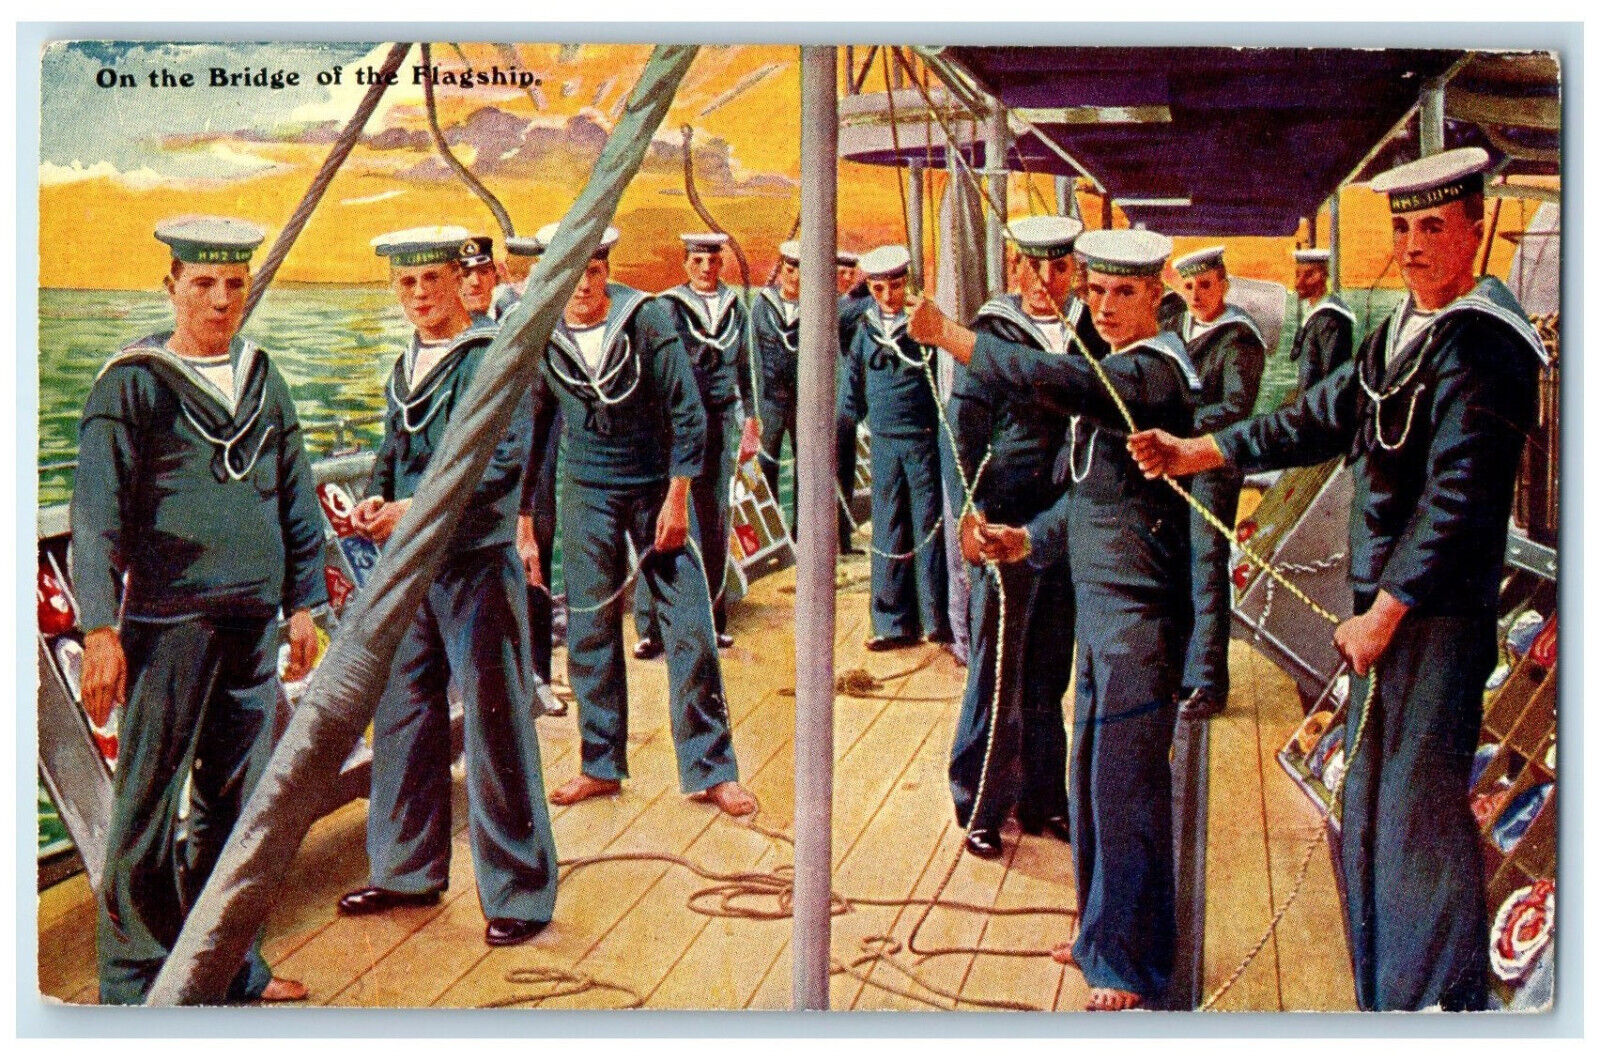 c1910 On The Bridge of the Flagship British Navy Unposted Antique Postcard